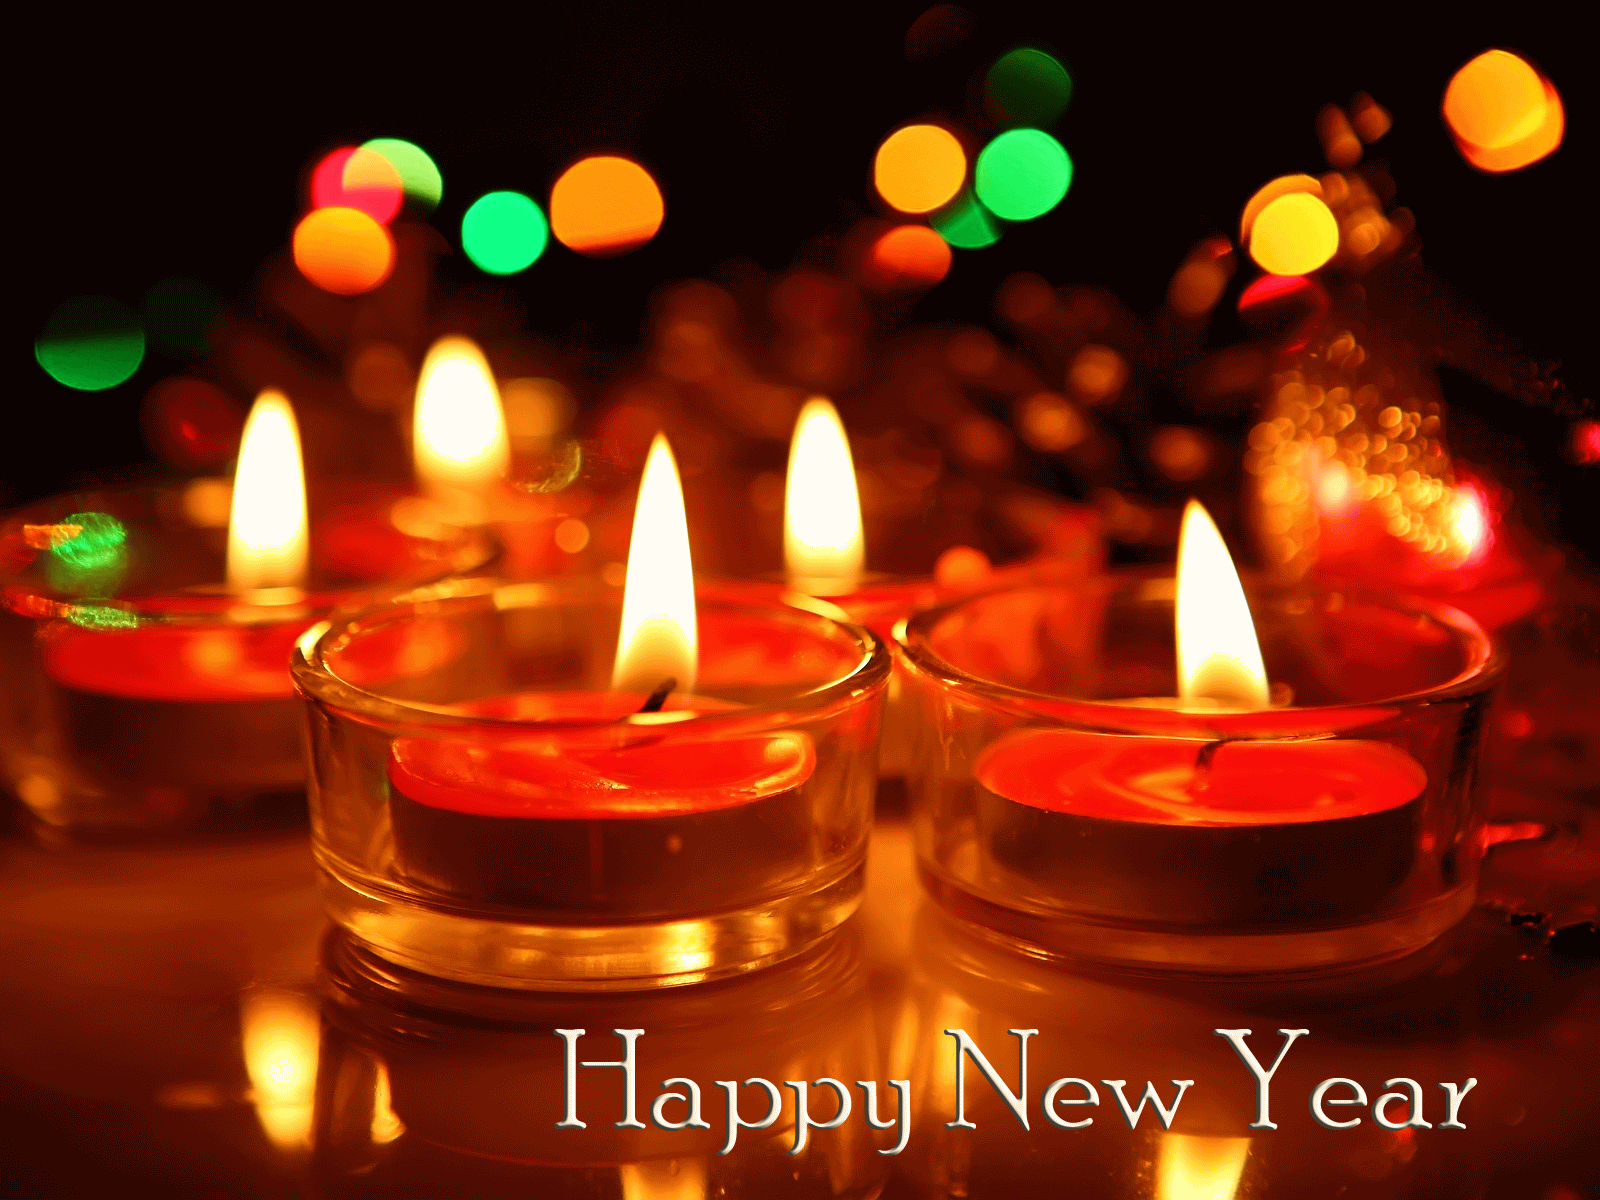 Happy New Year Floating Candles Image